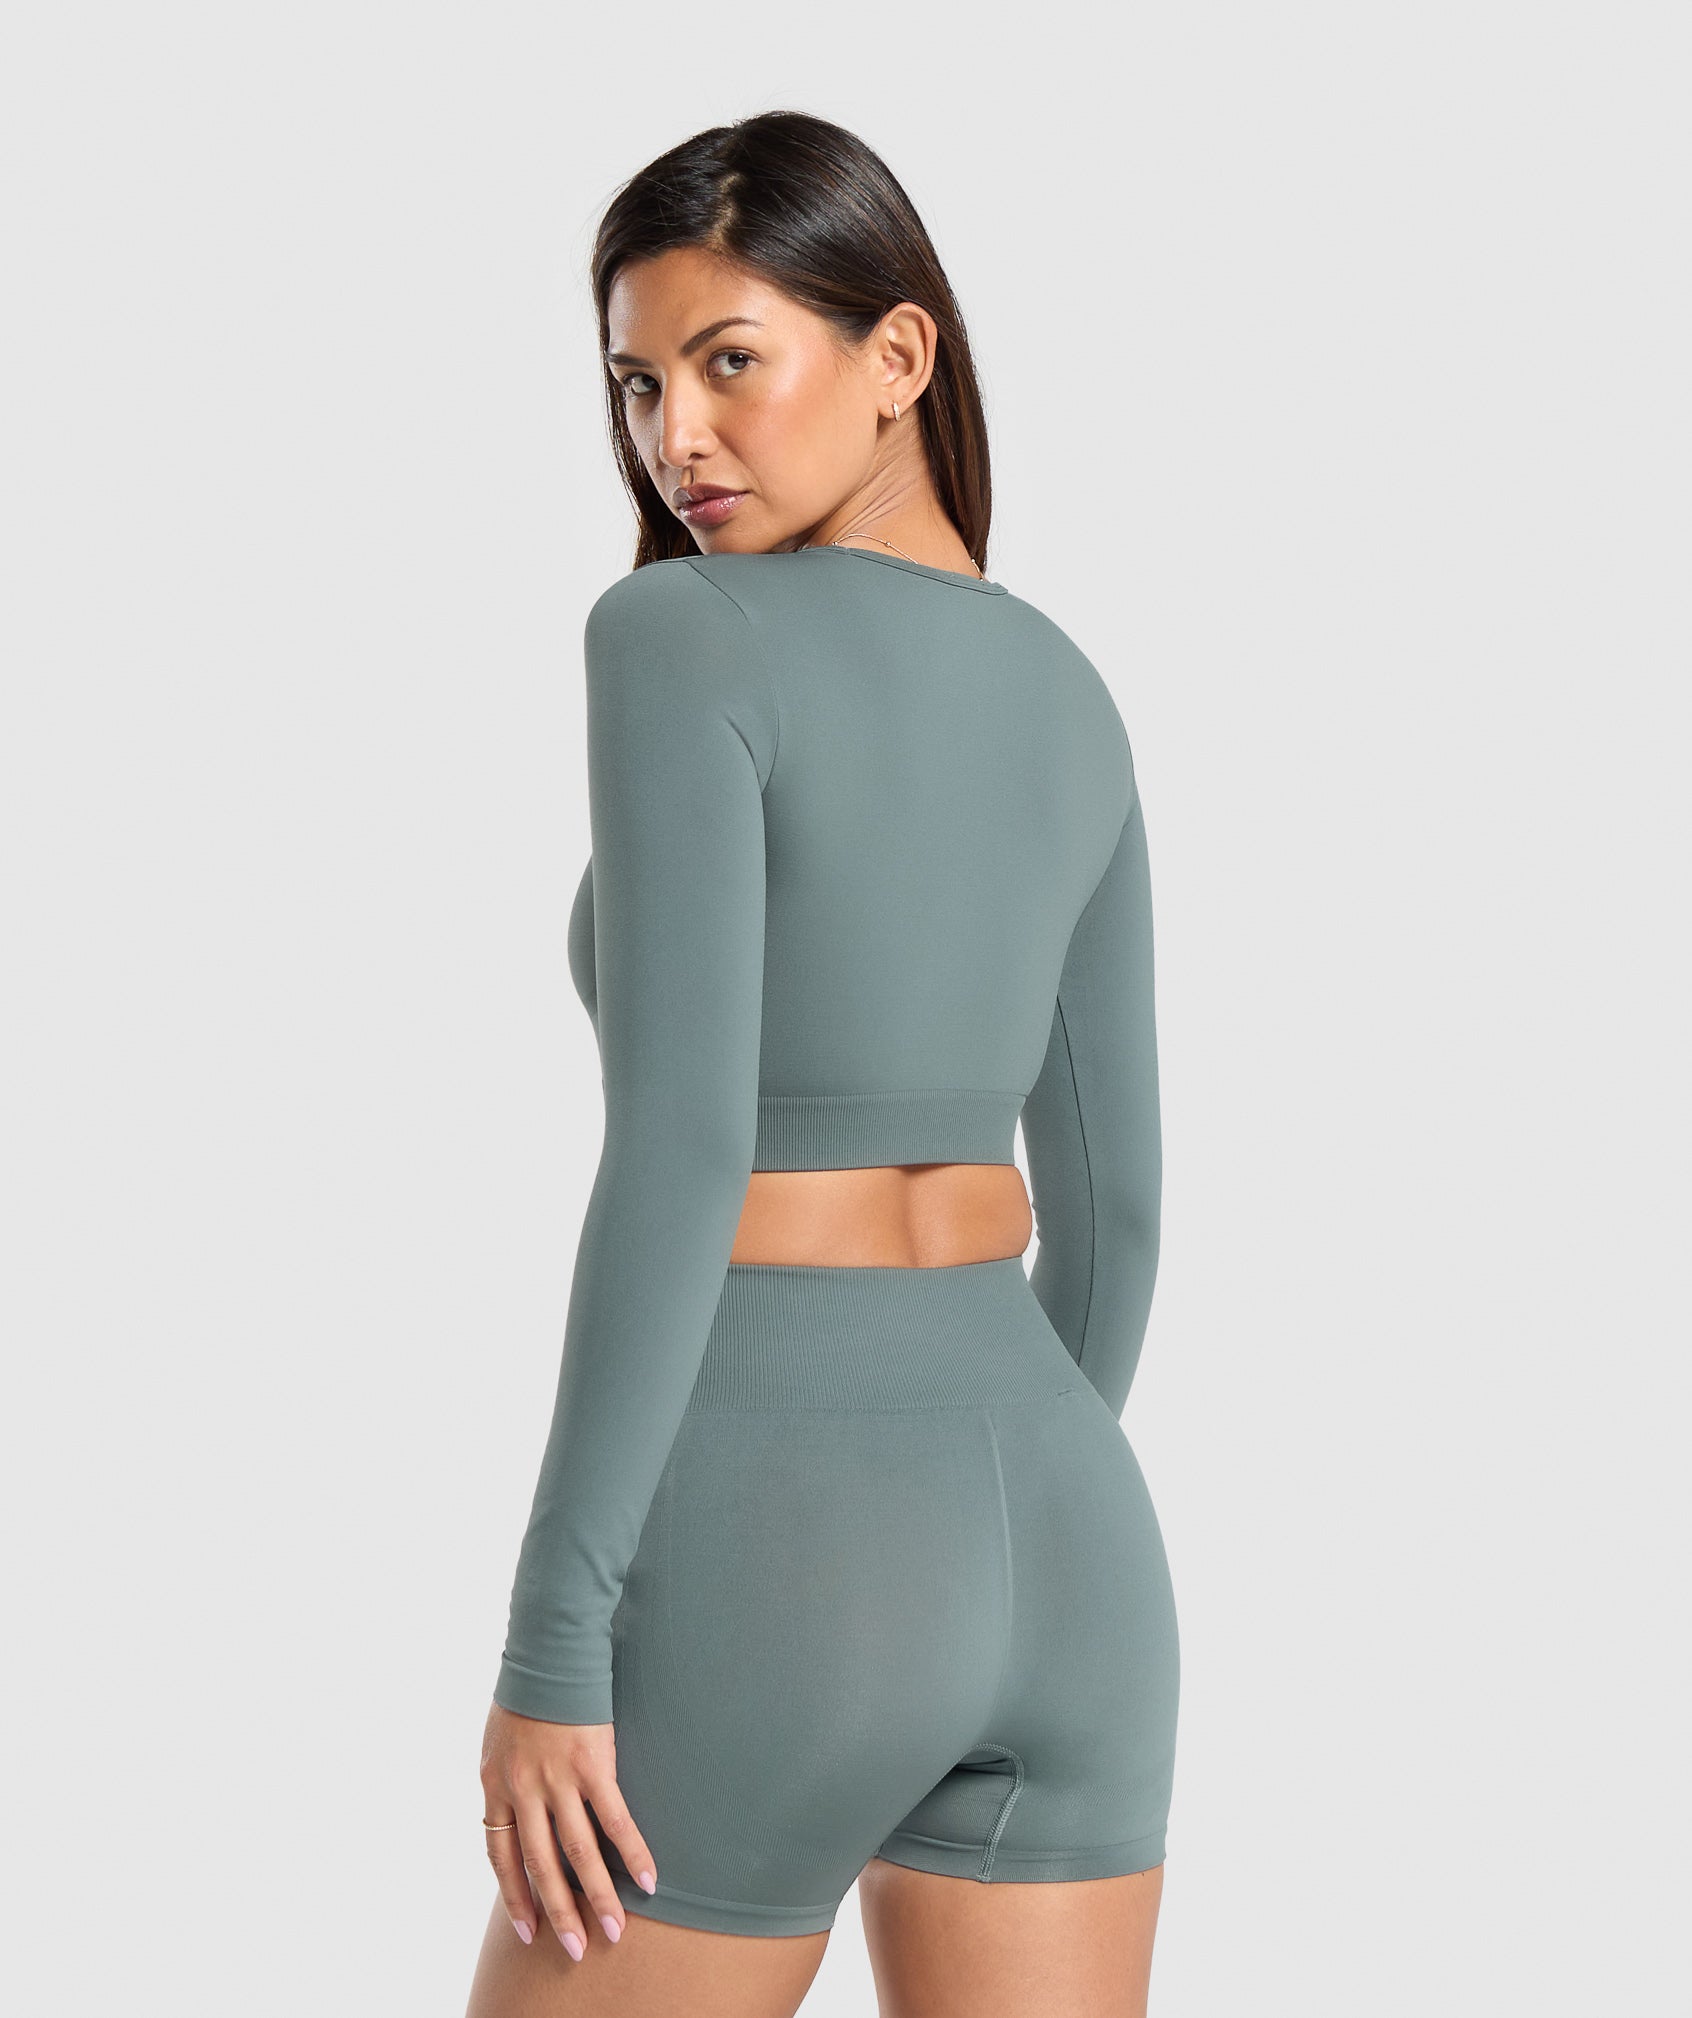 Everyday Seamless Long Sleeve Crop Top in Cargo Teal - view 2